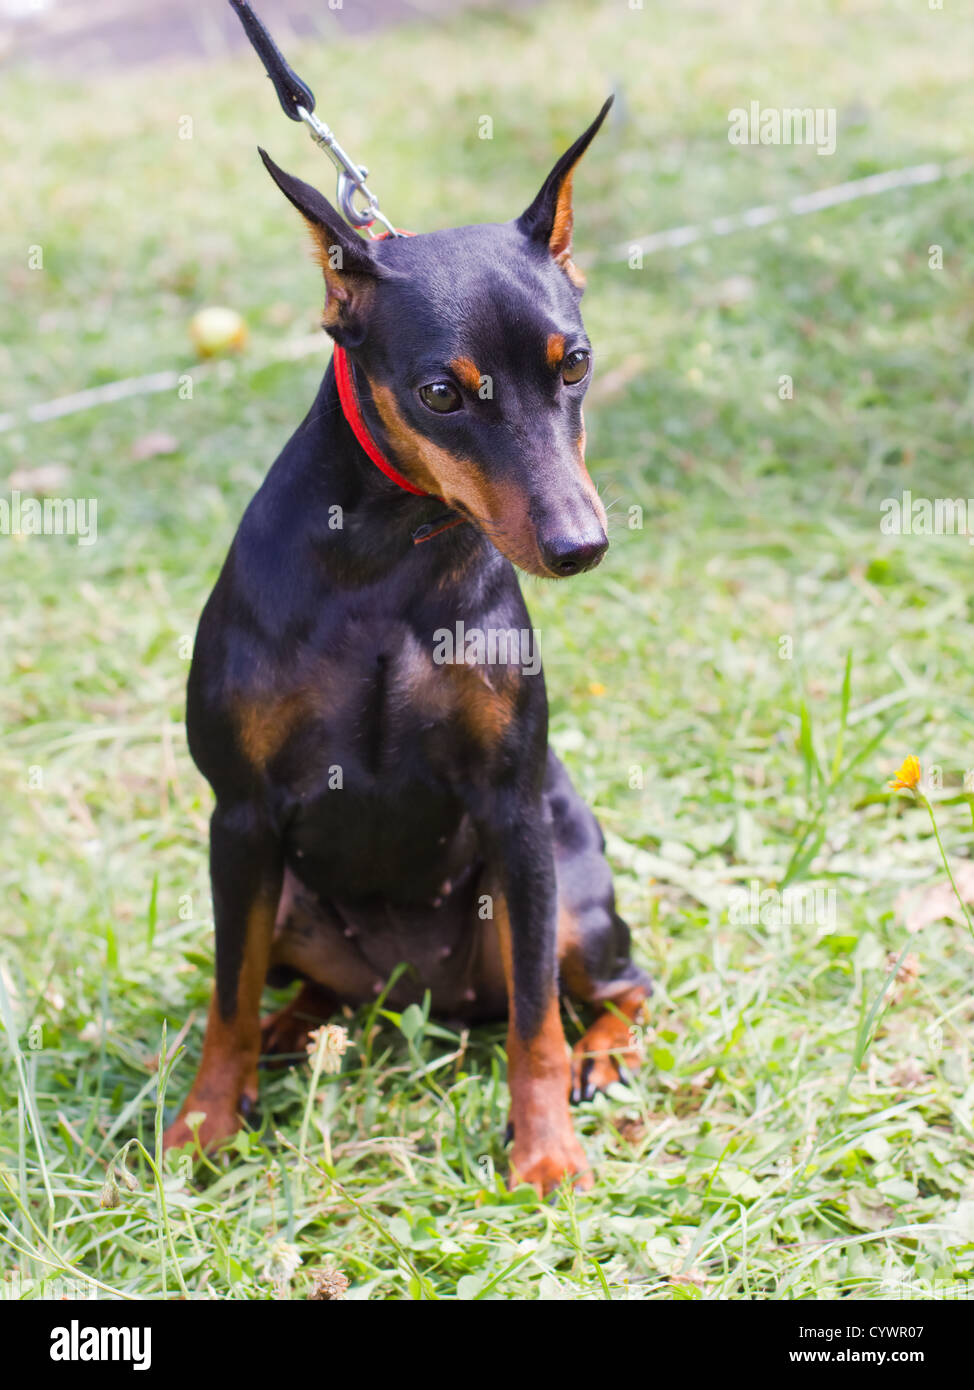 dog Miniature Pinscher breed (King of the Toys) sitting Stock Photo